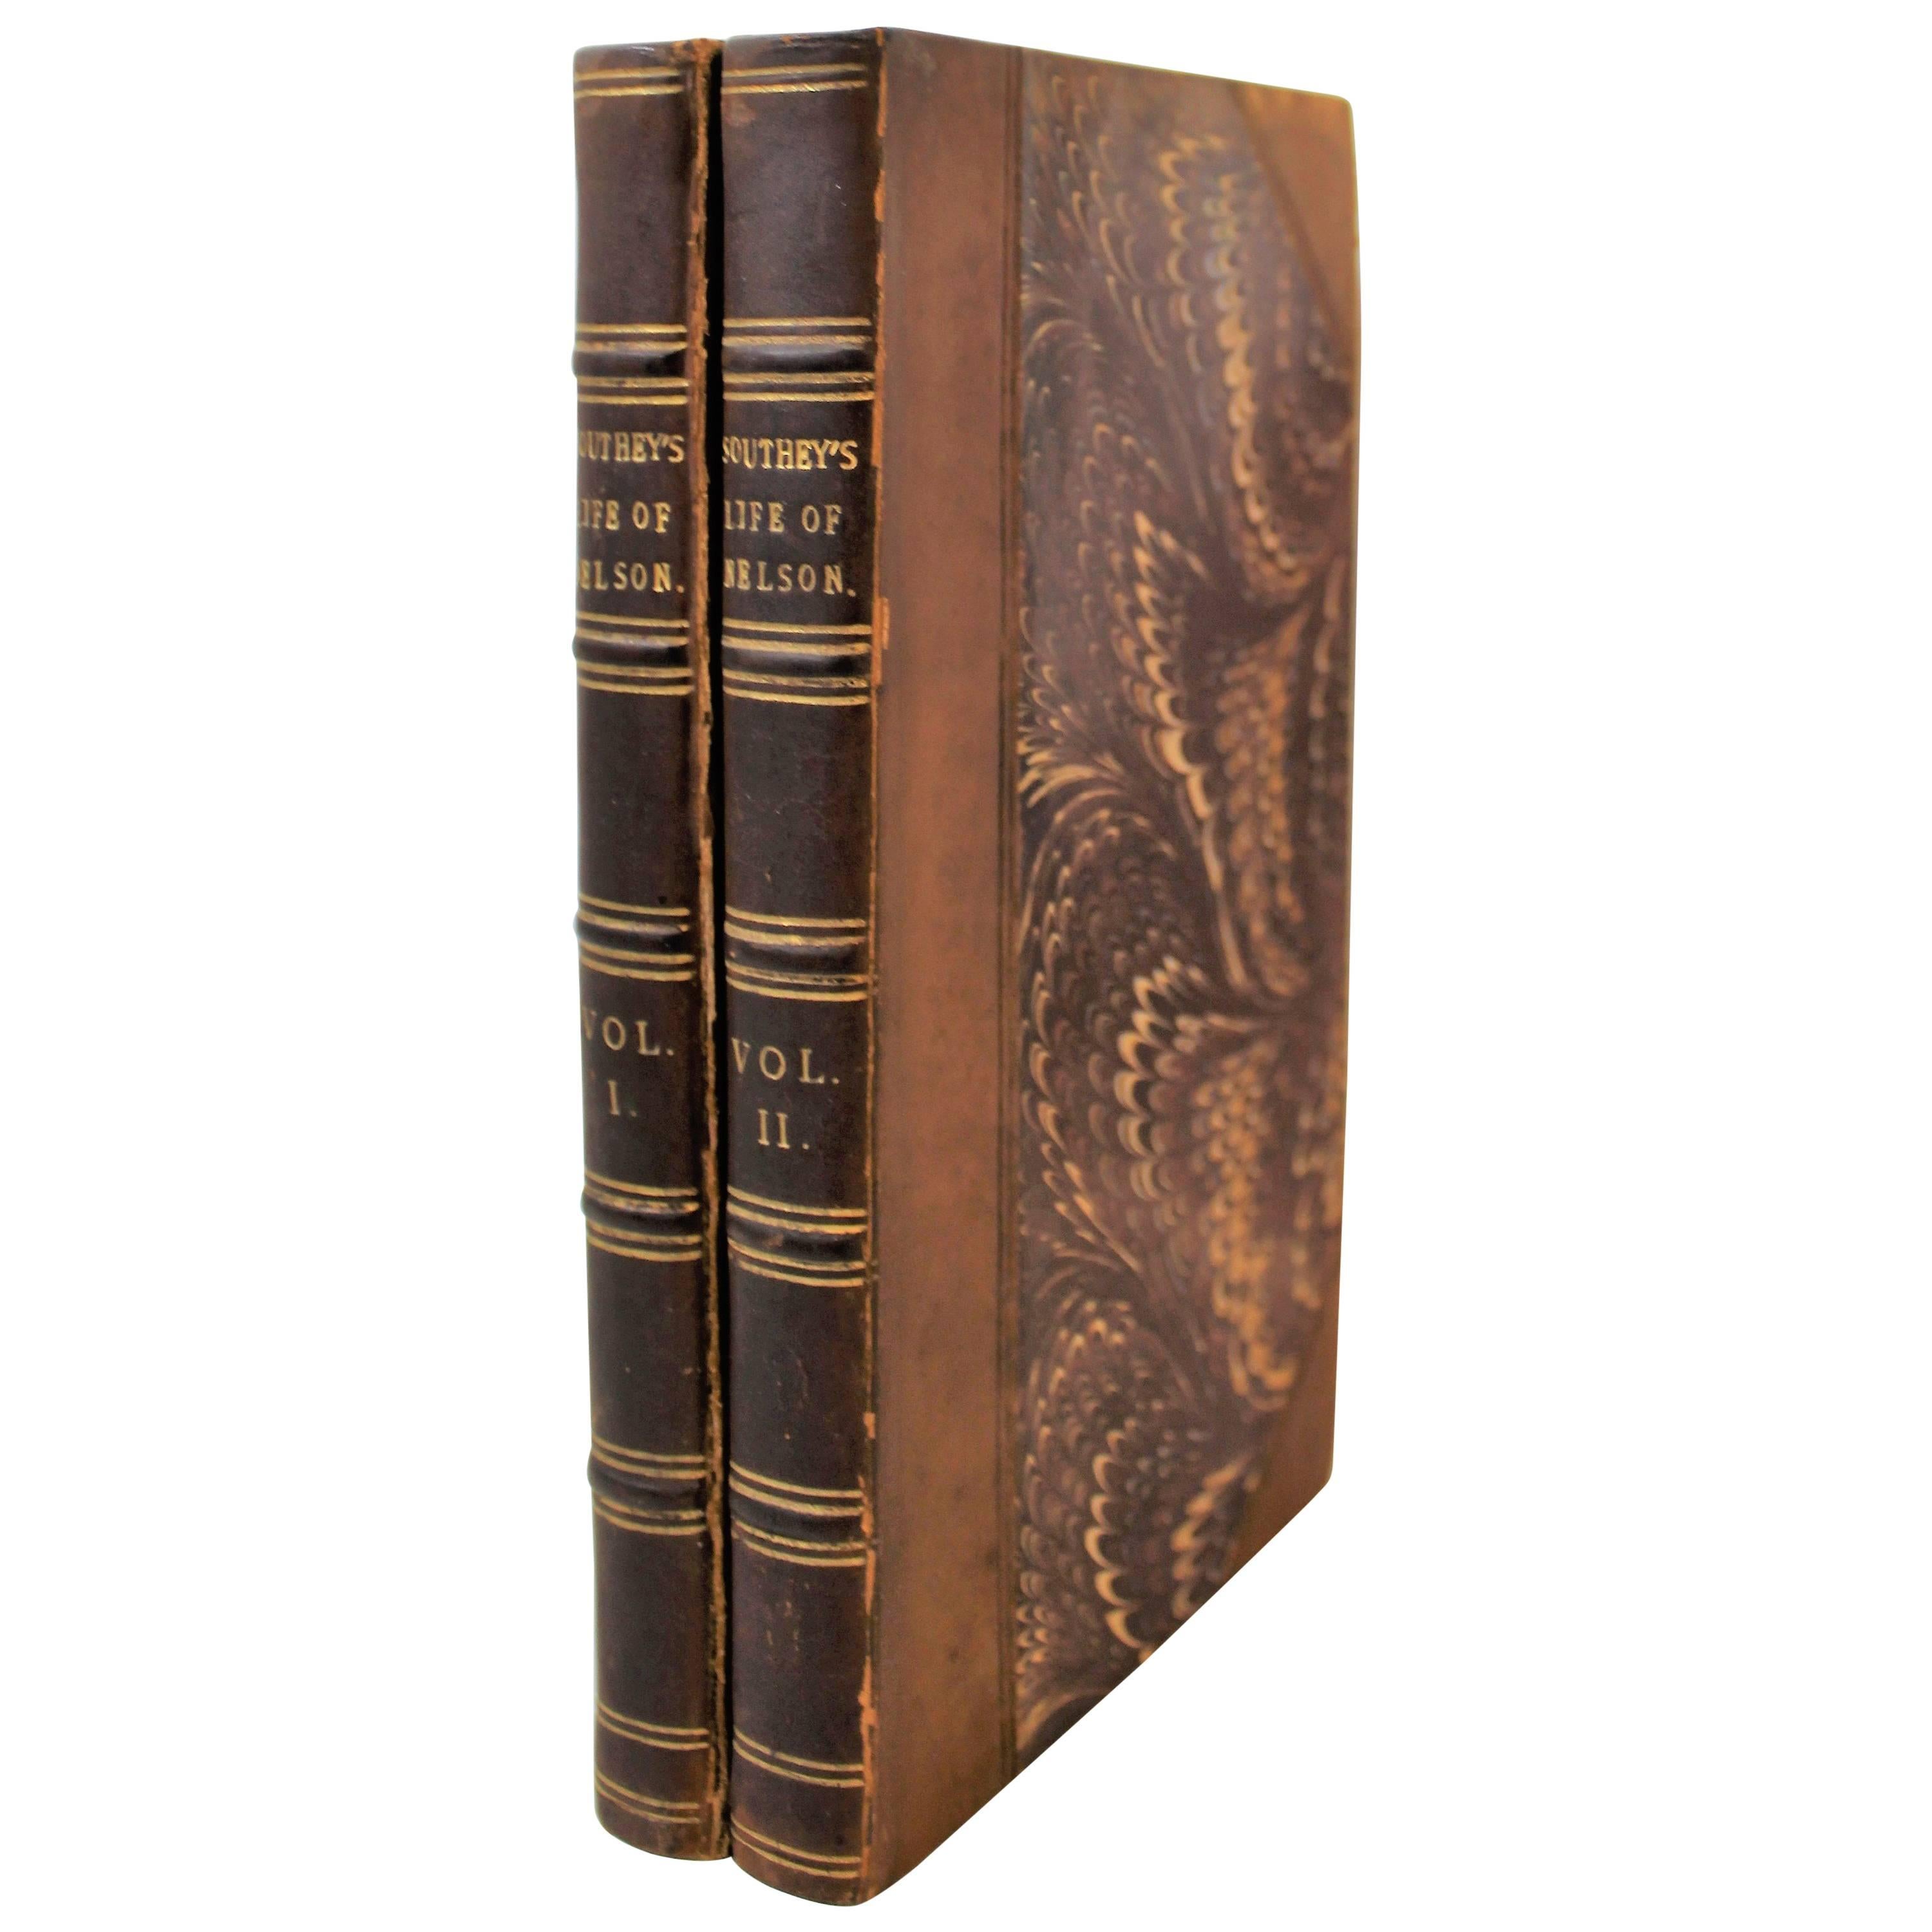 'The Life of Nelson" First Edition books by Robert Southey